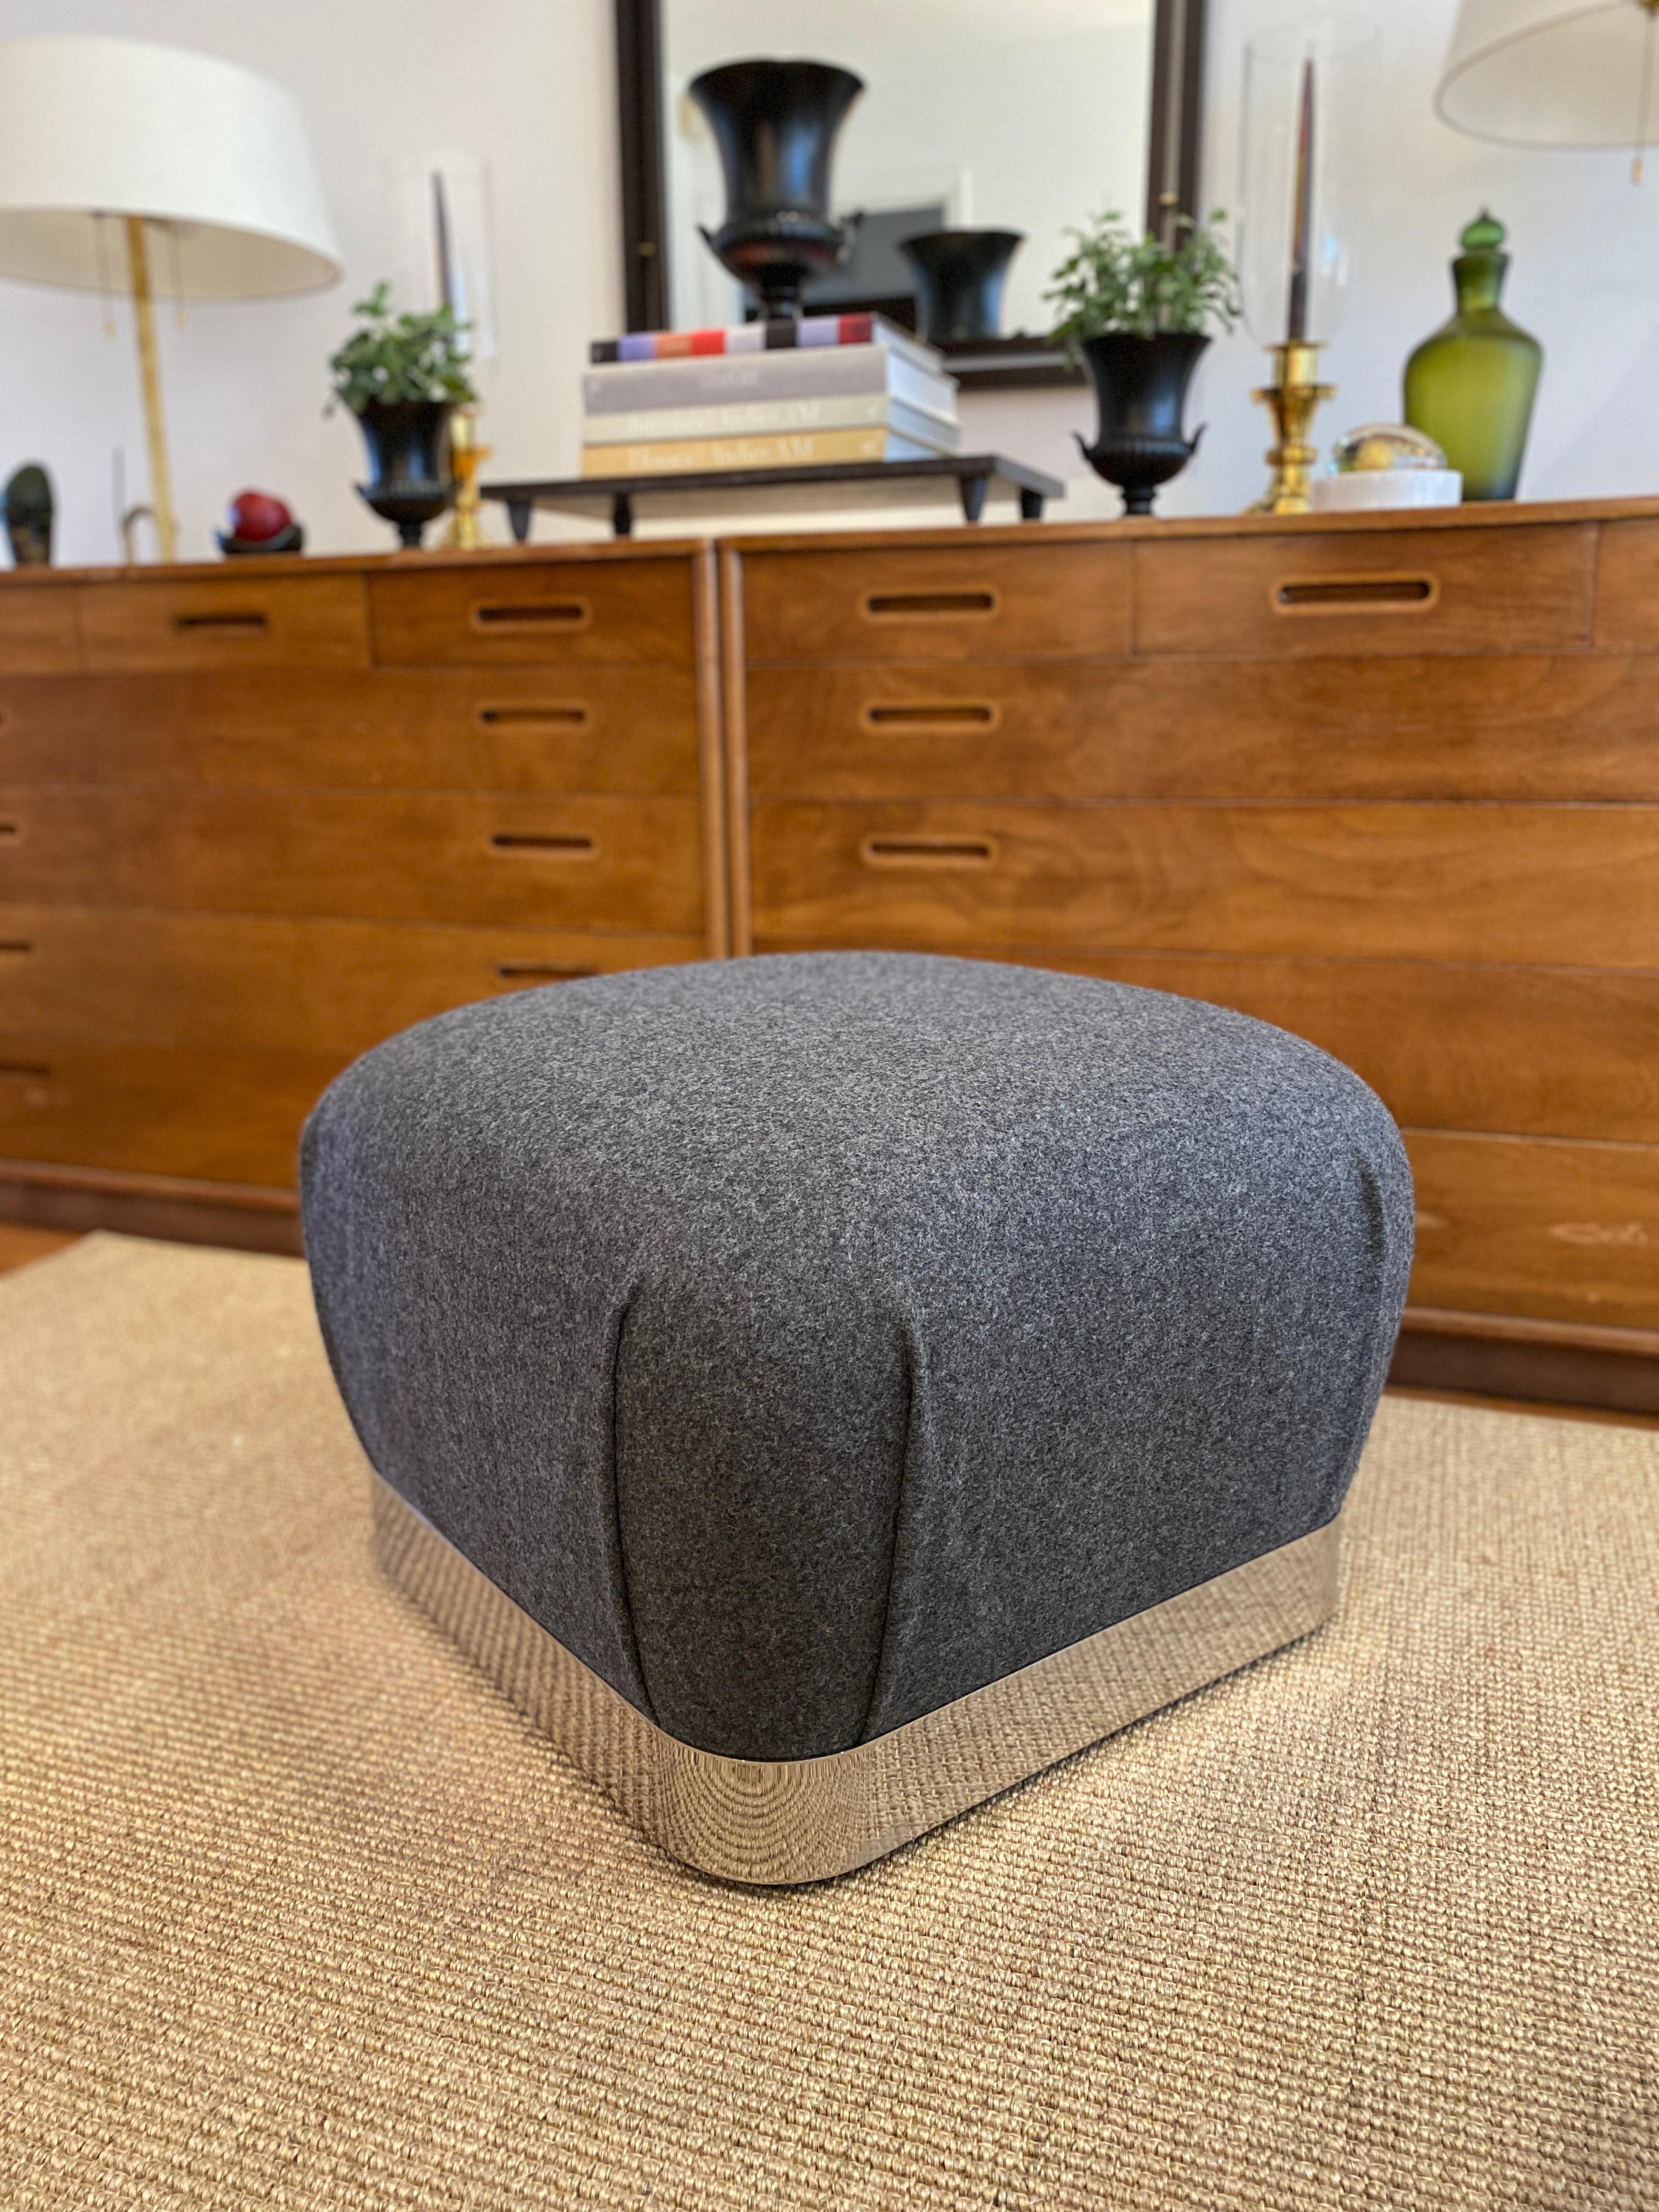 Vintage Karl Springer Soufflé ottoman or pouf recently reupholstered in a gray 100% wool felt. The Kvadrat fabric is Divine Melange 3, 170 gray, by Finn Sködt. The ottoman is approximately 18 inches tall with a width and depth of 22 inches. The